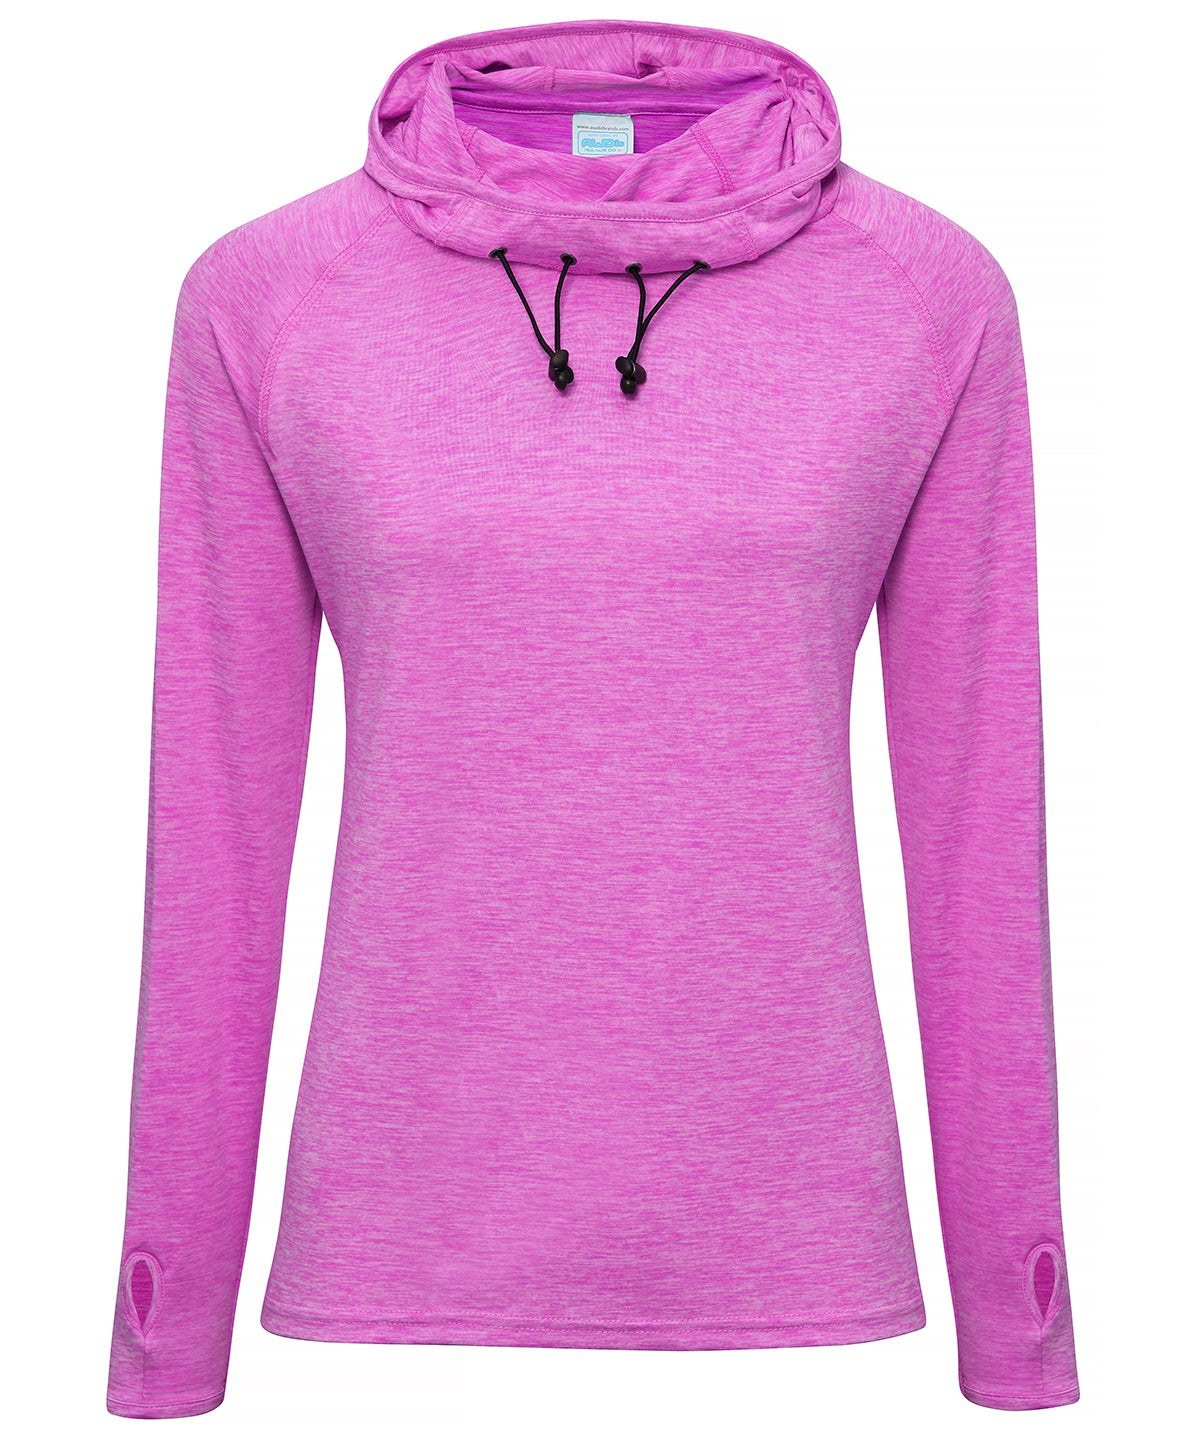 Personalised Sports Overtops - Neon Pink AWDis Just Cool Women's cool cowl neck top